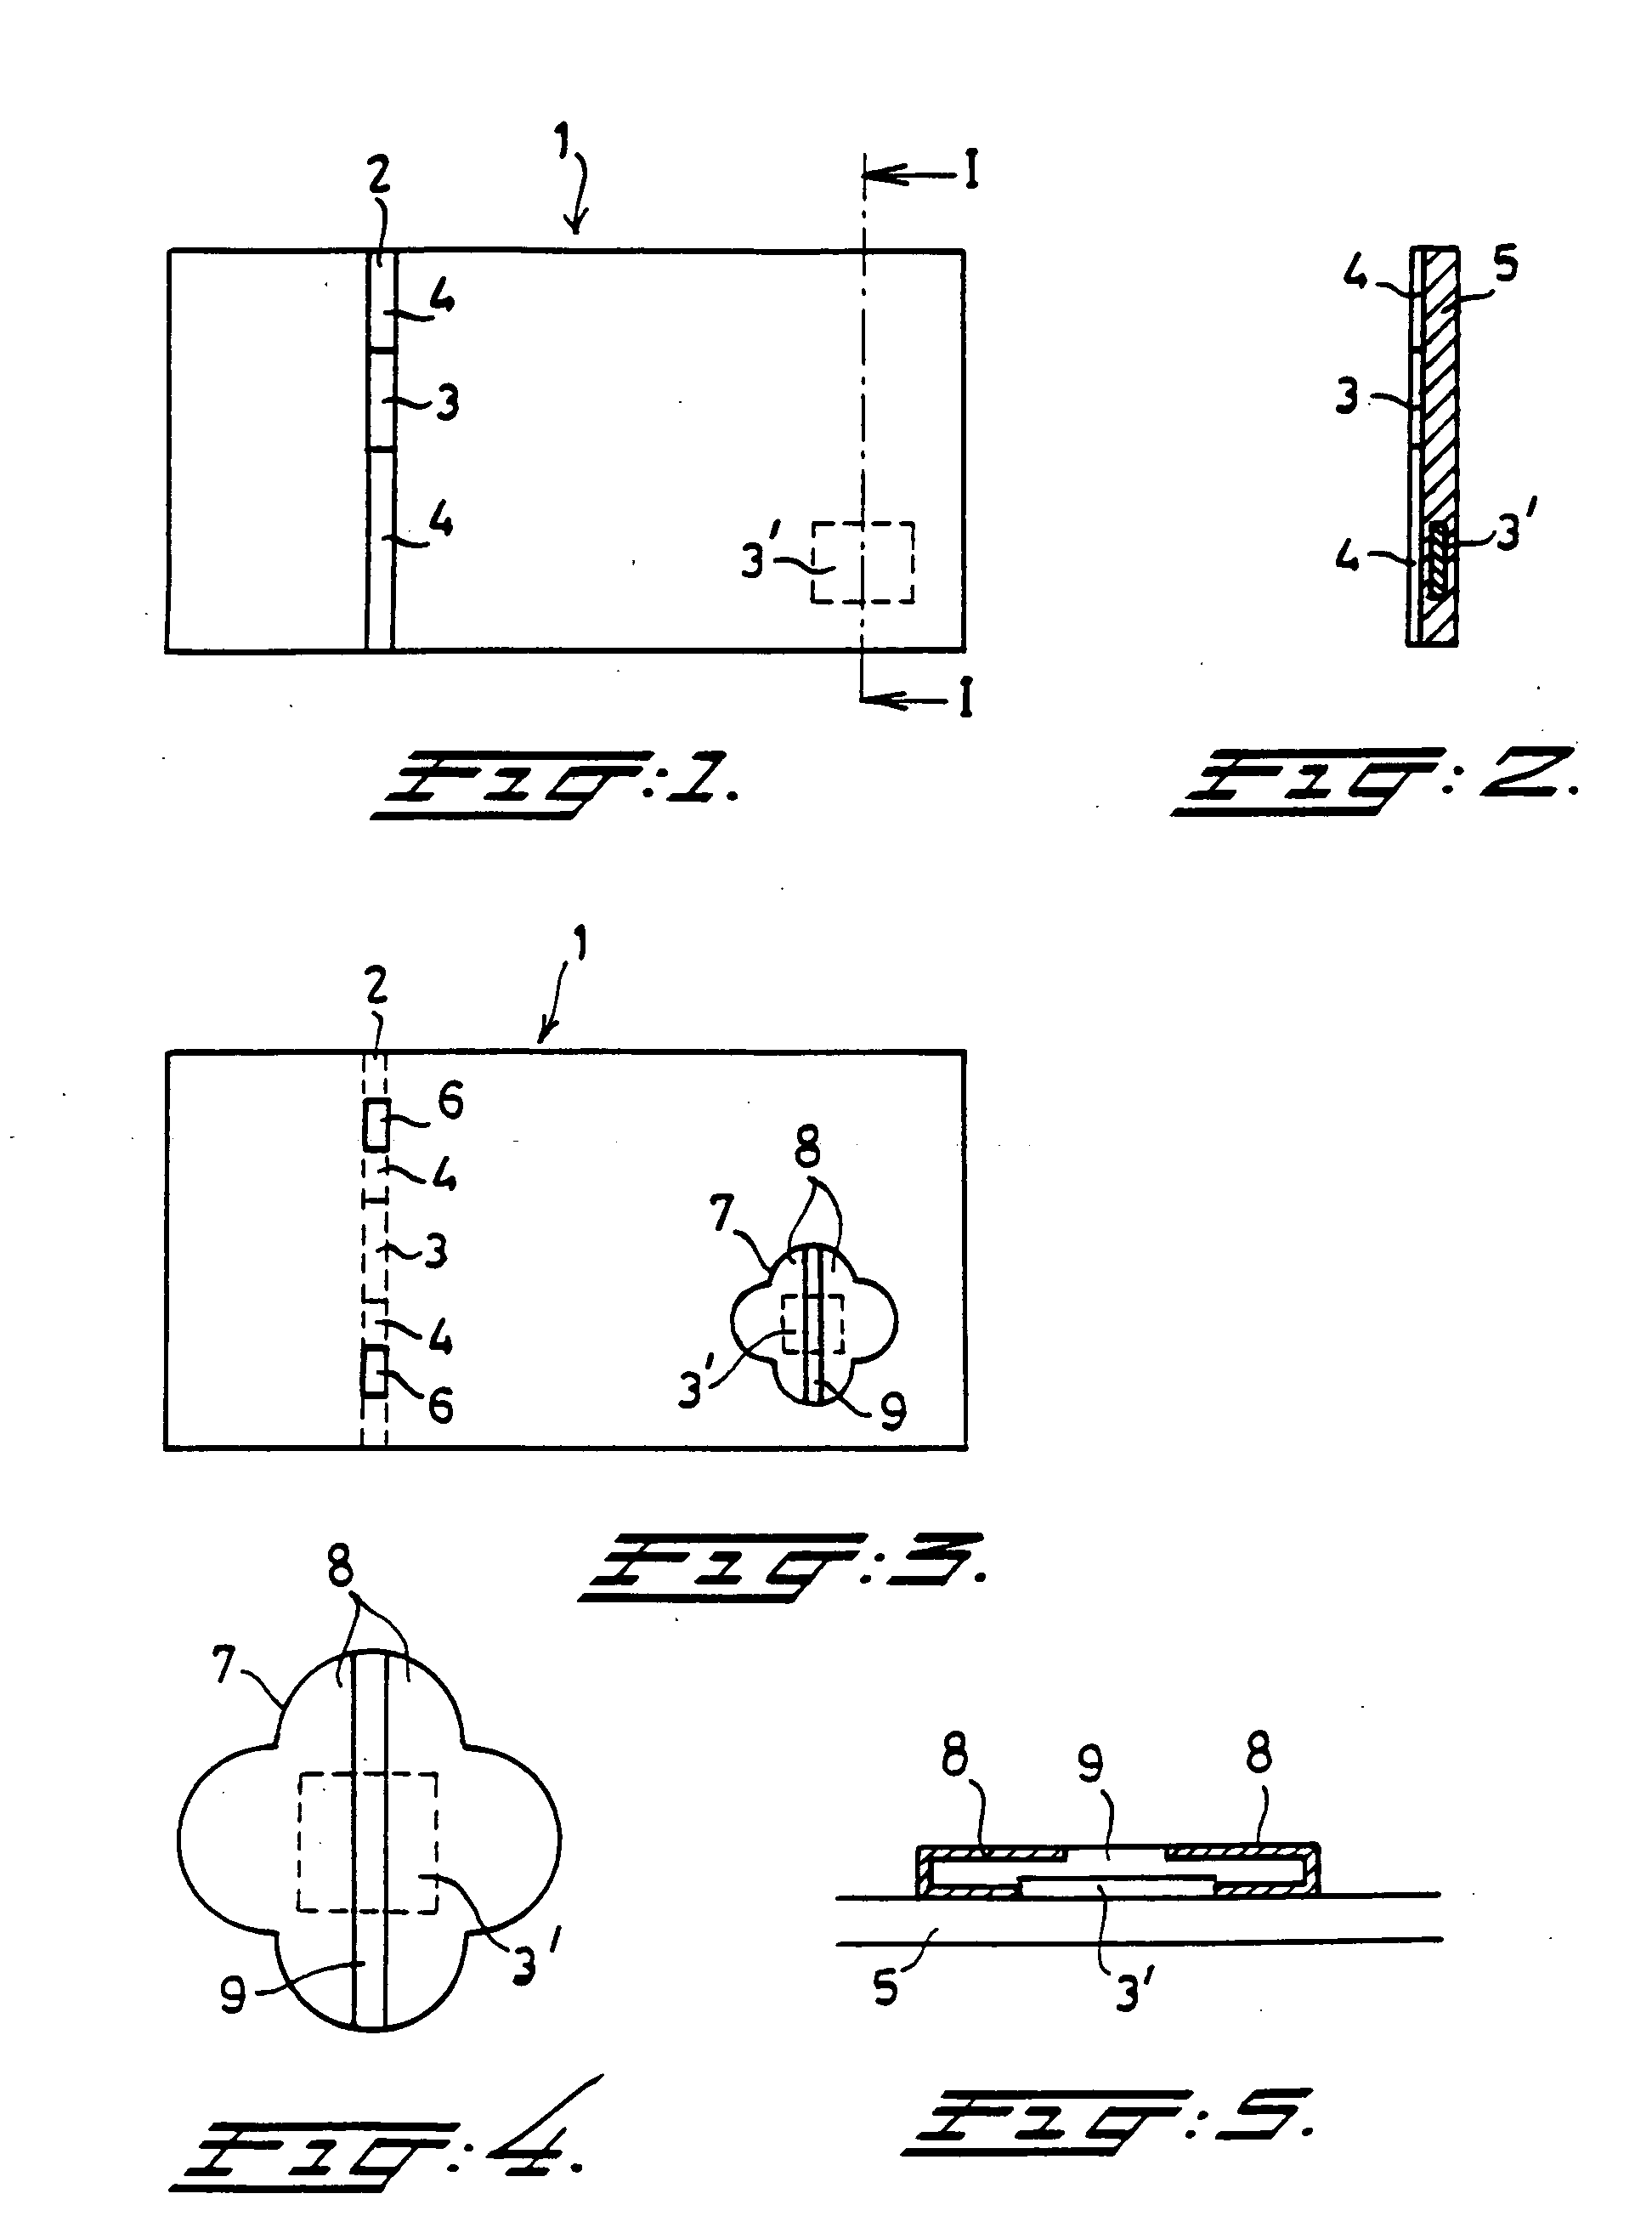 Substrate which is made from paper and is provided with an integrated circuit